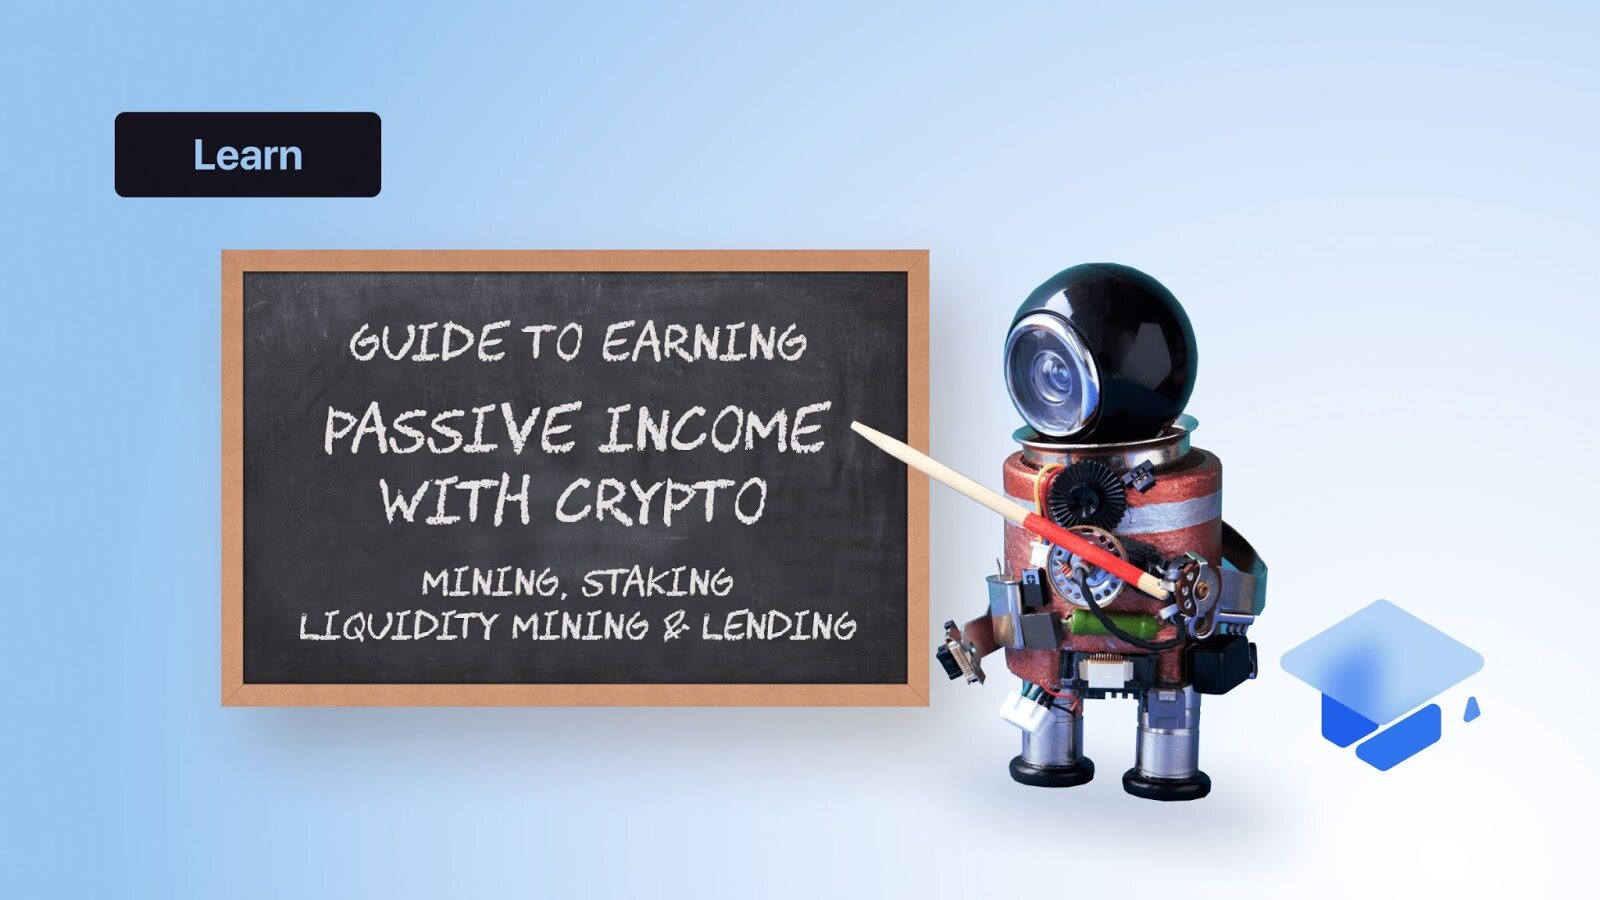 Guide to earning passive income with crypto: Mining, staking, liquidity mining and lending